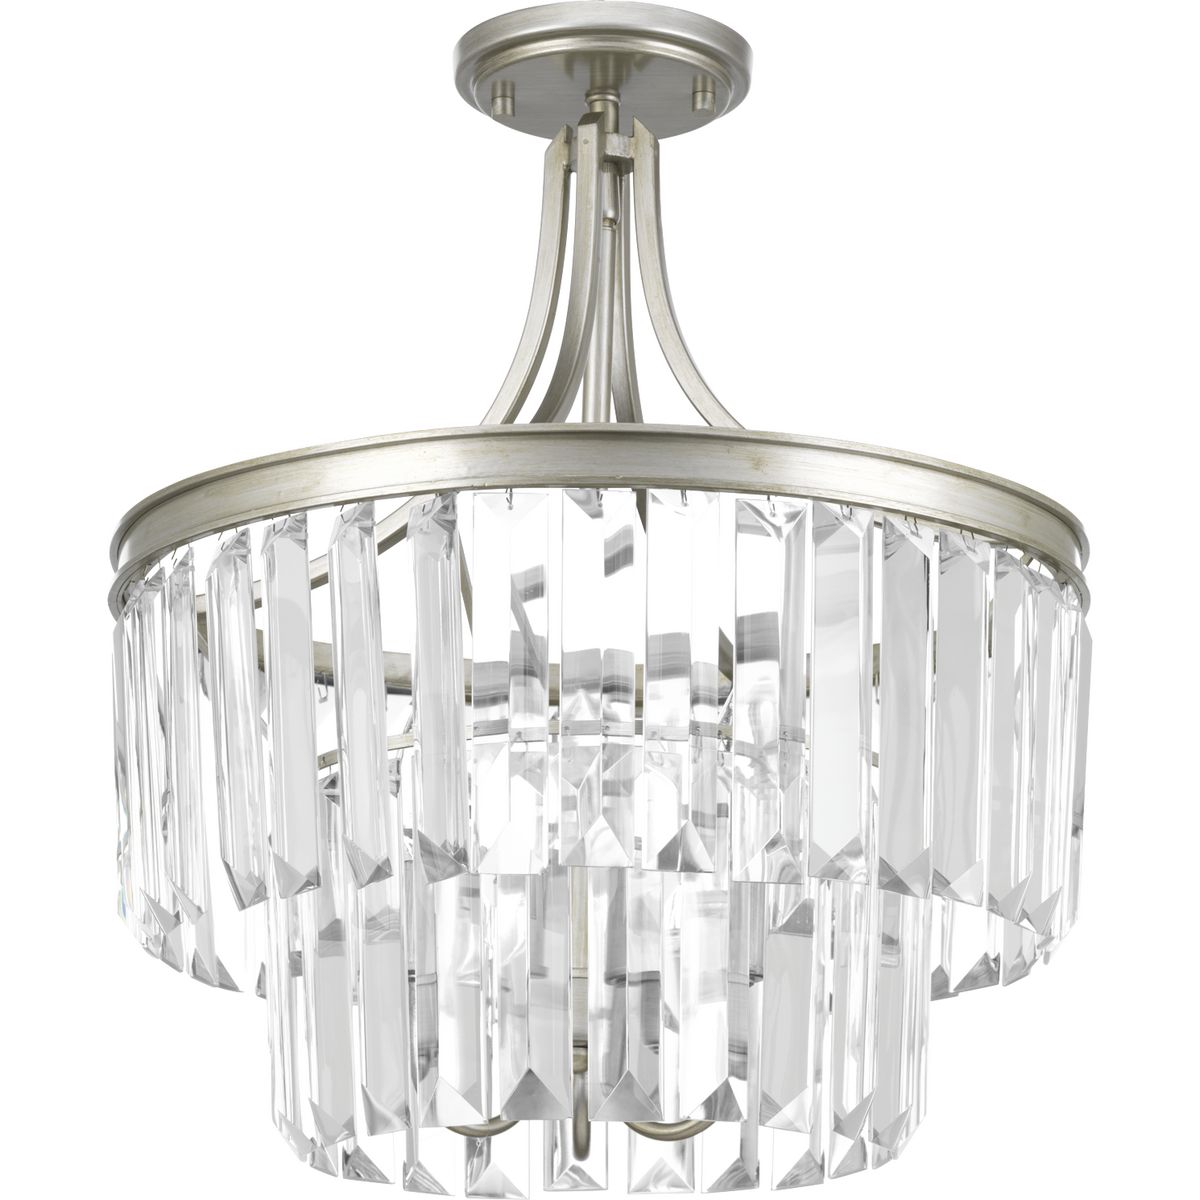 Glimmer Collection Three-Light 19" Semi-Flush Convertible - Dry Location Listed - Model P2326-20